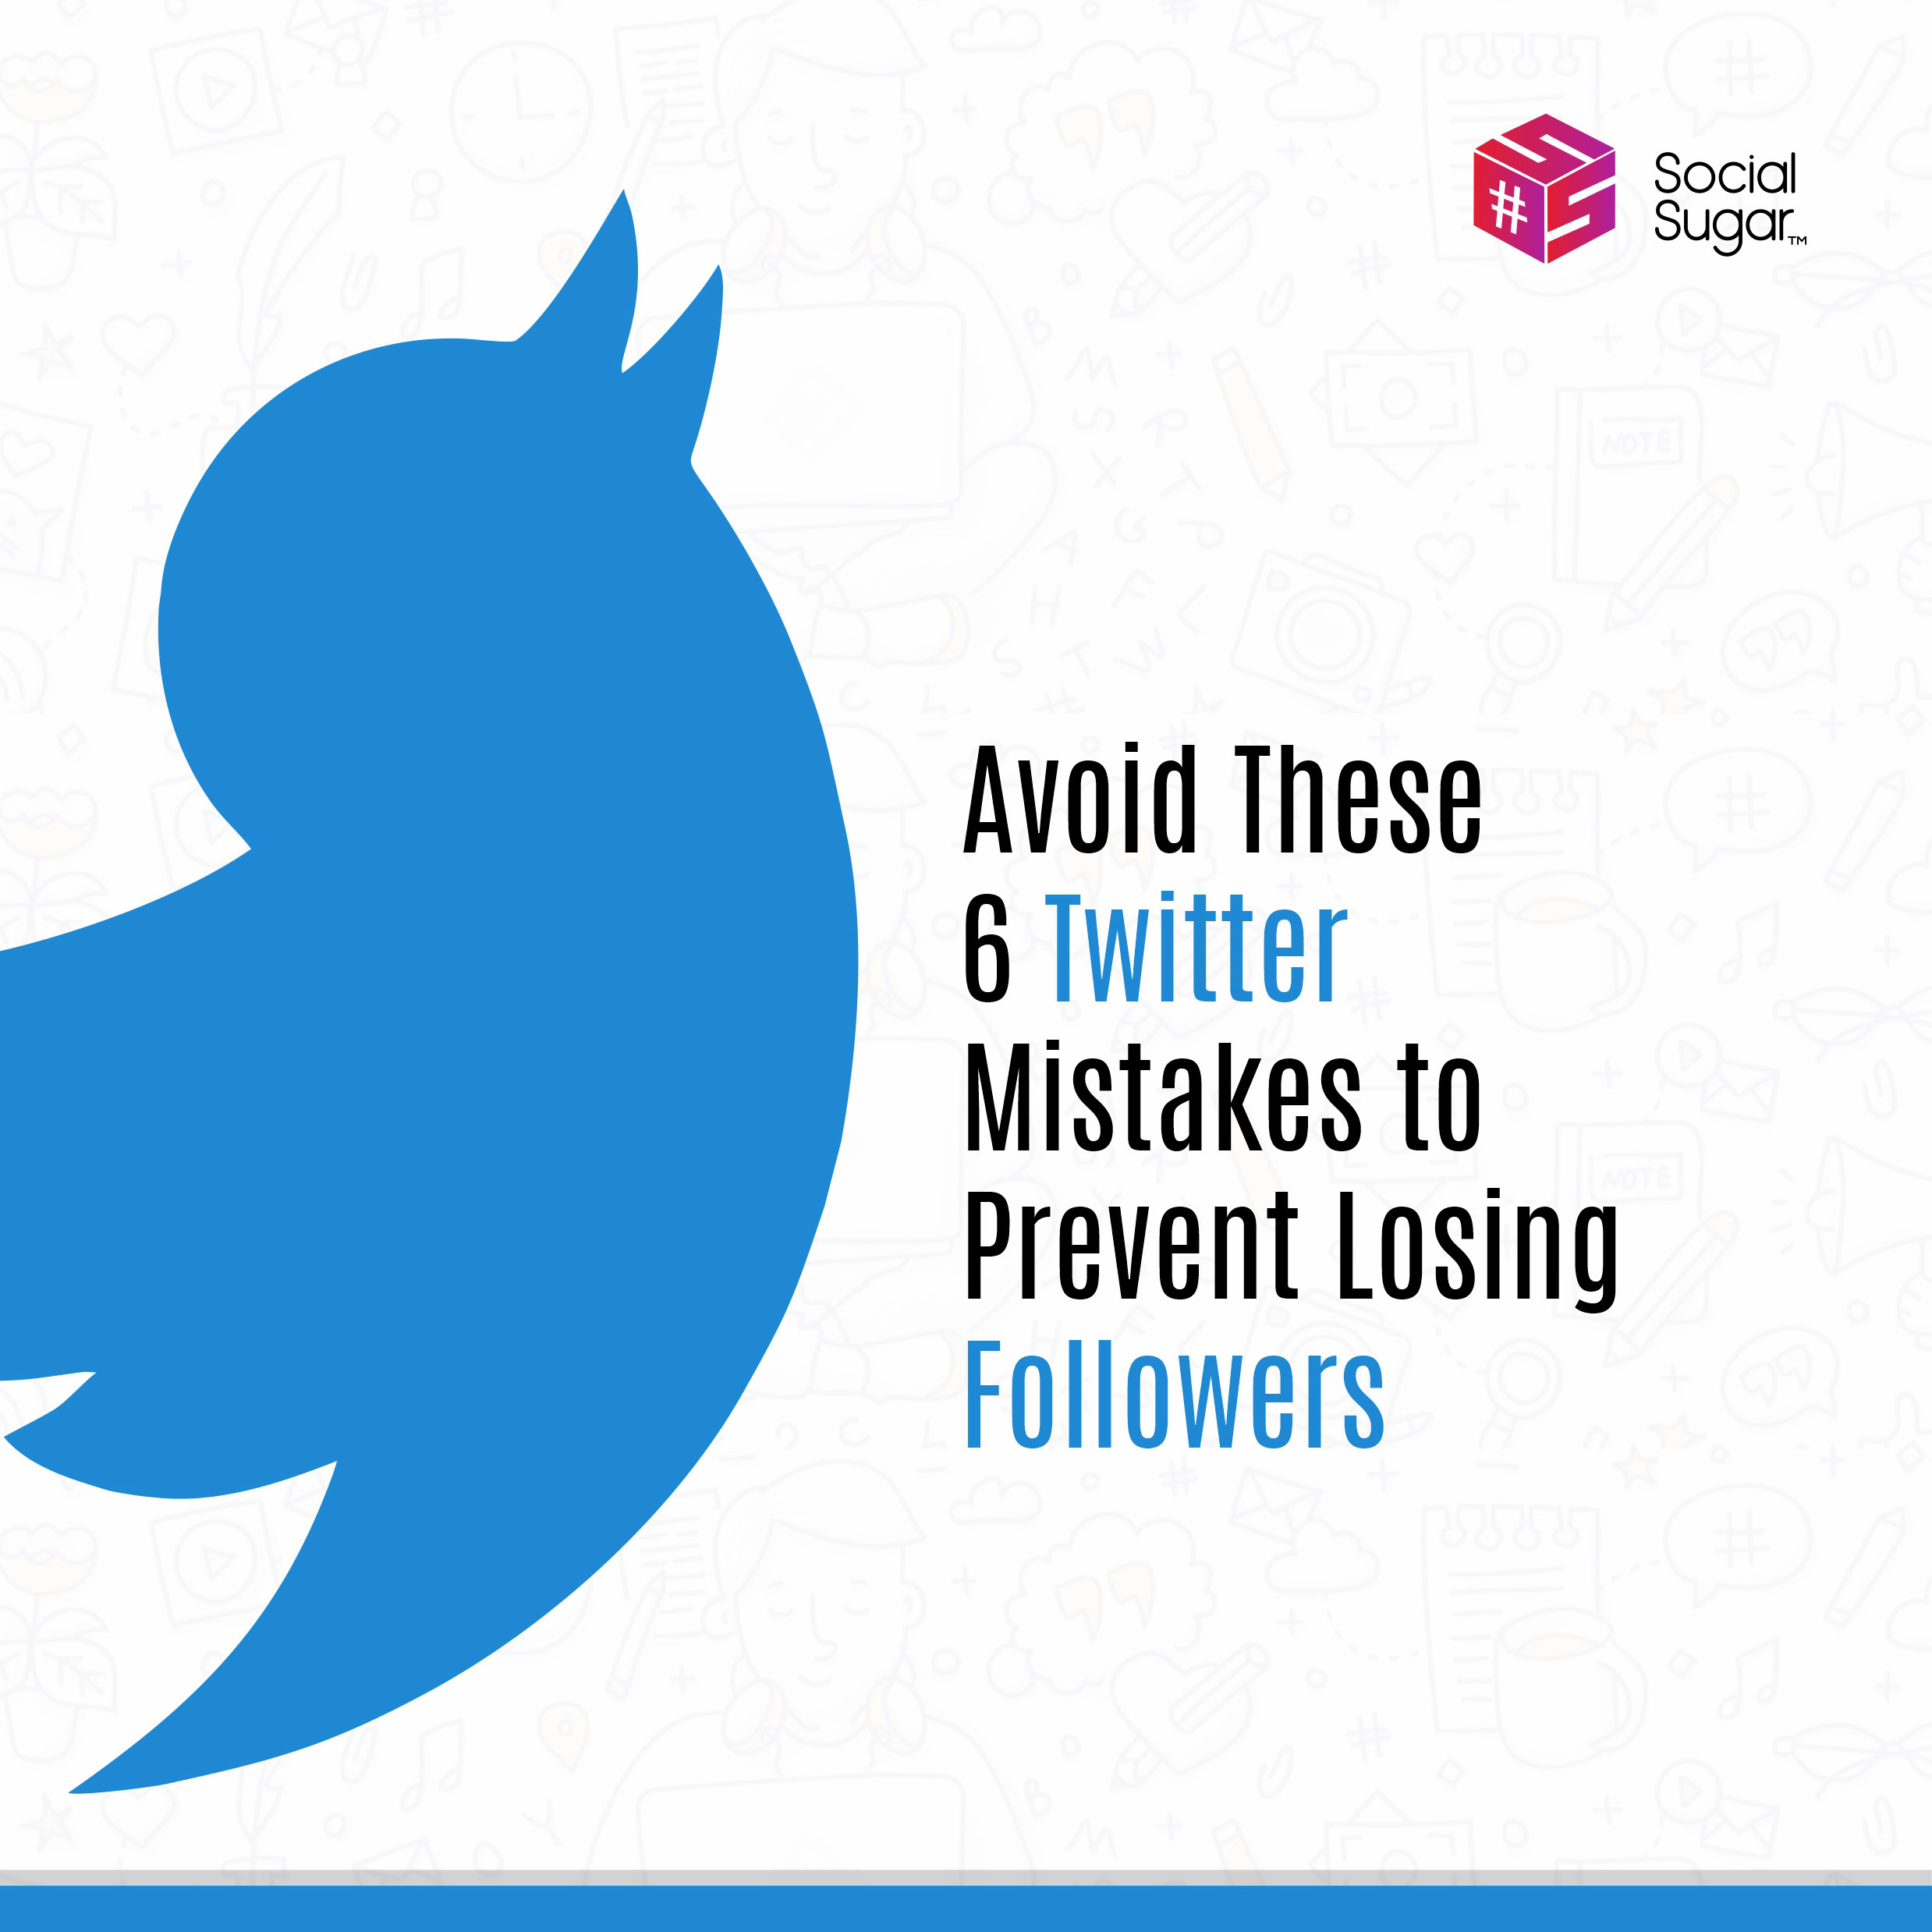 Avoid These 6 Twitter Mistakes To Prevent Losing Followers